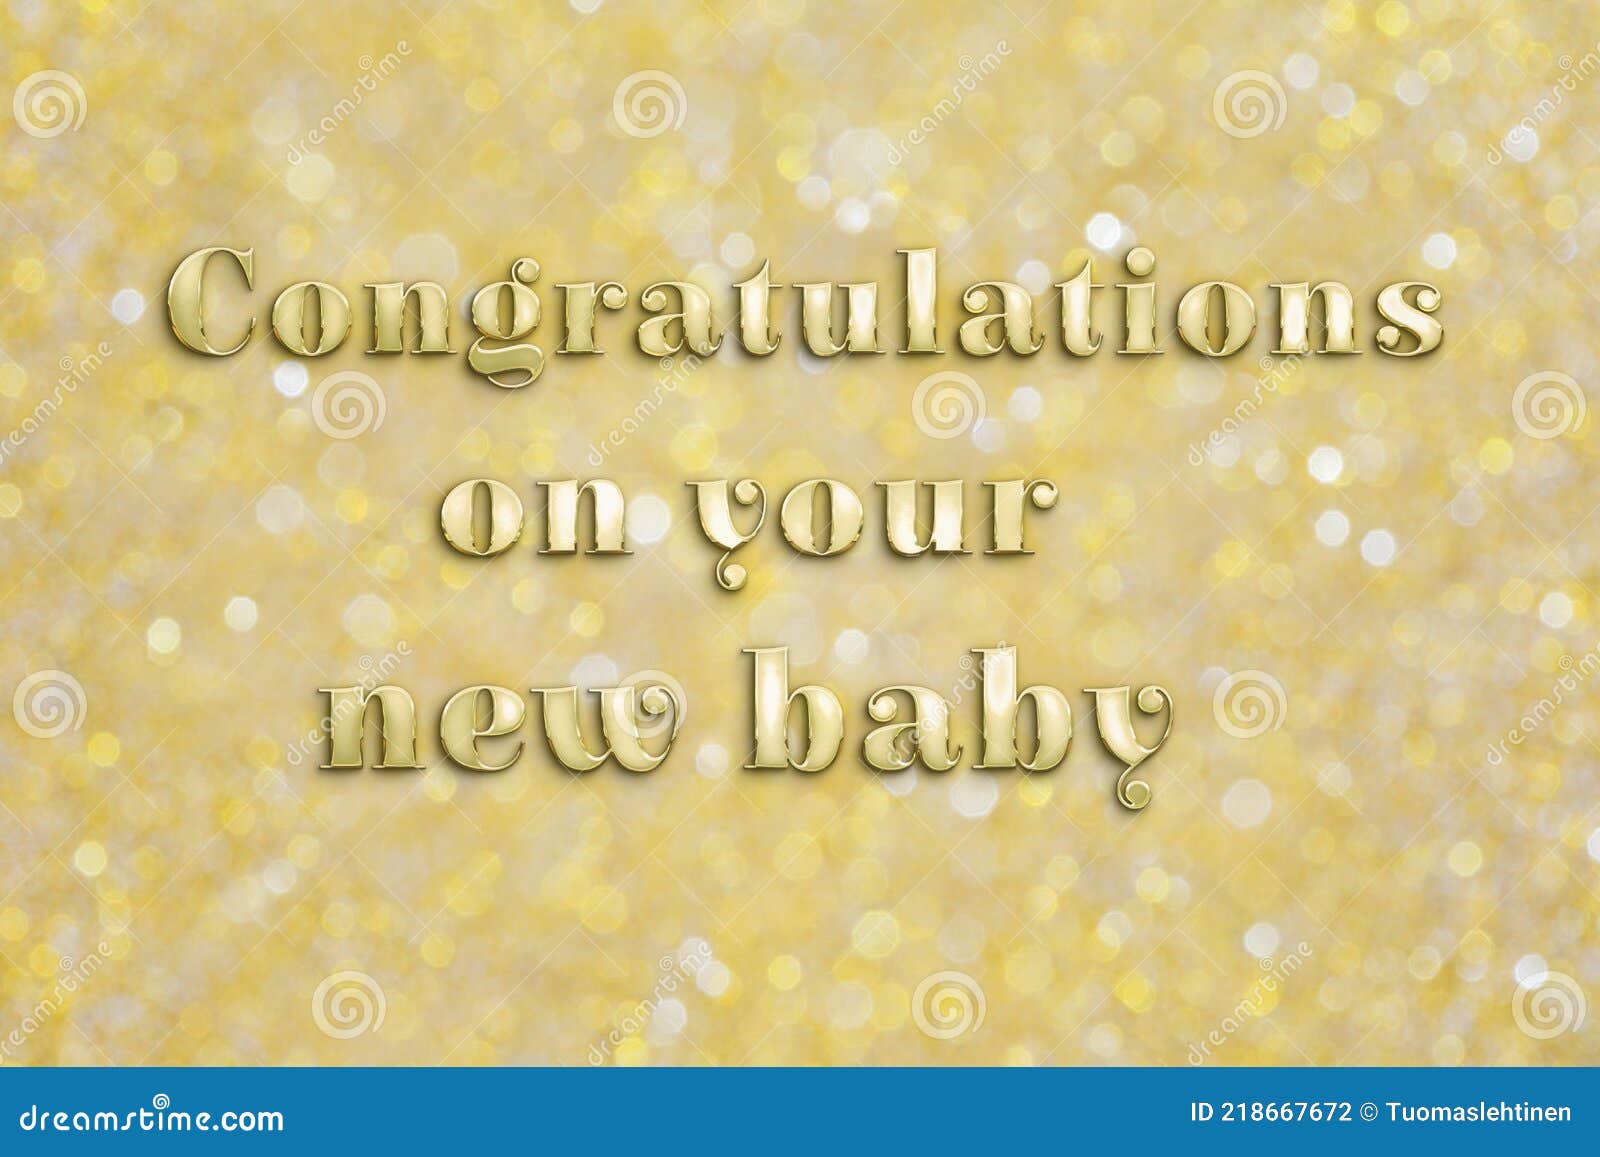 Congratulations on your new baby